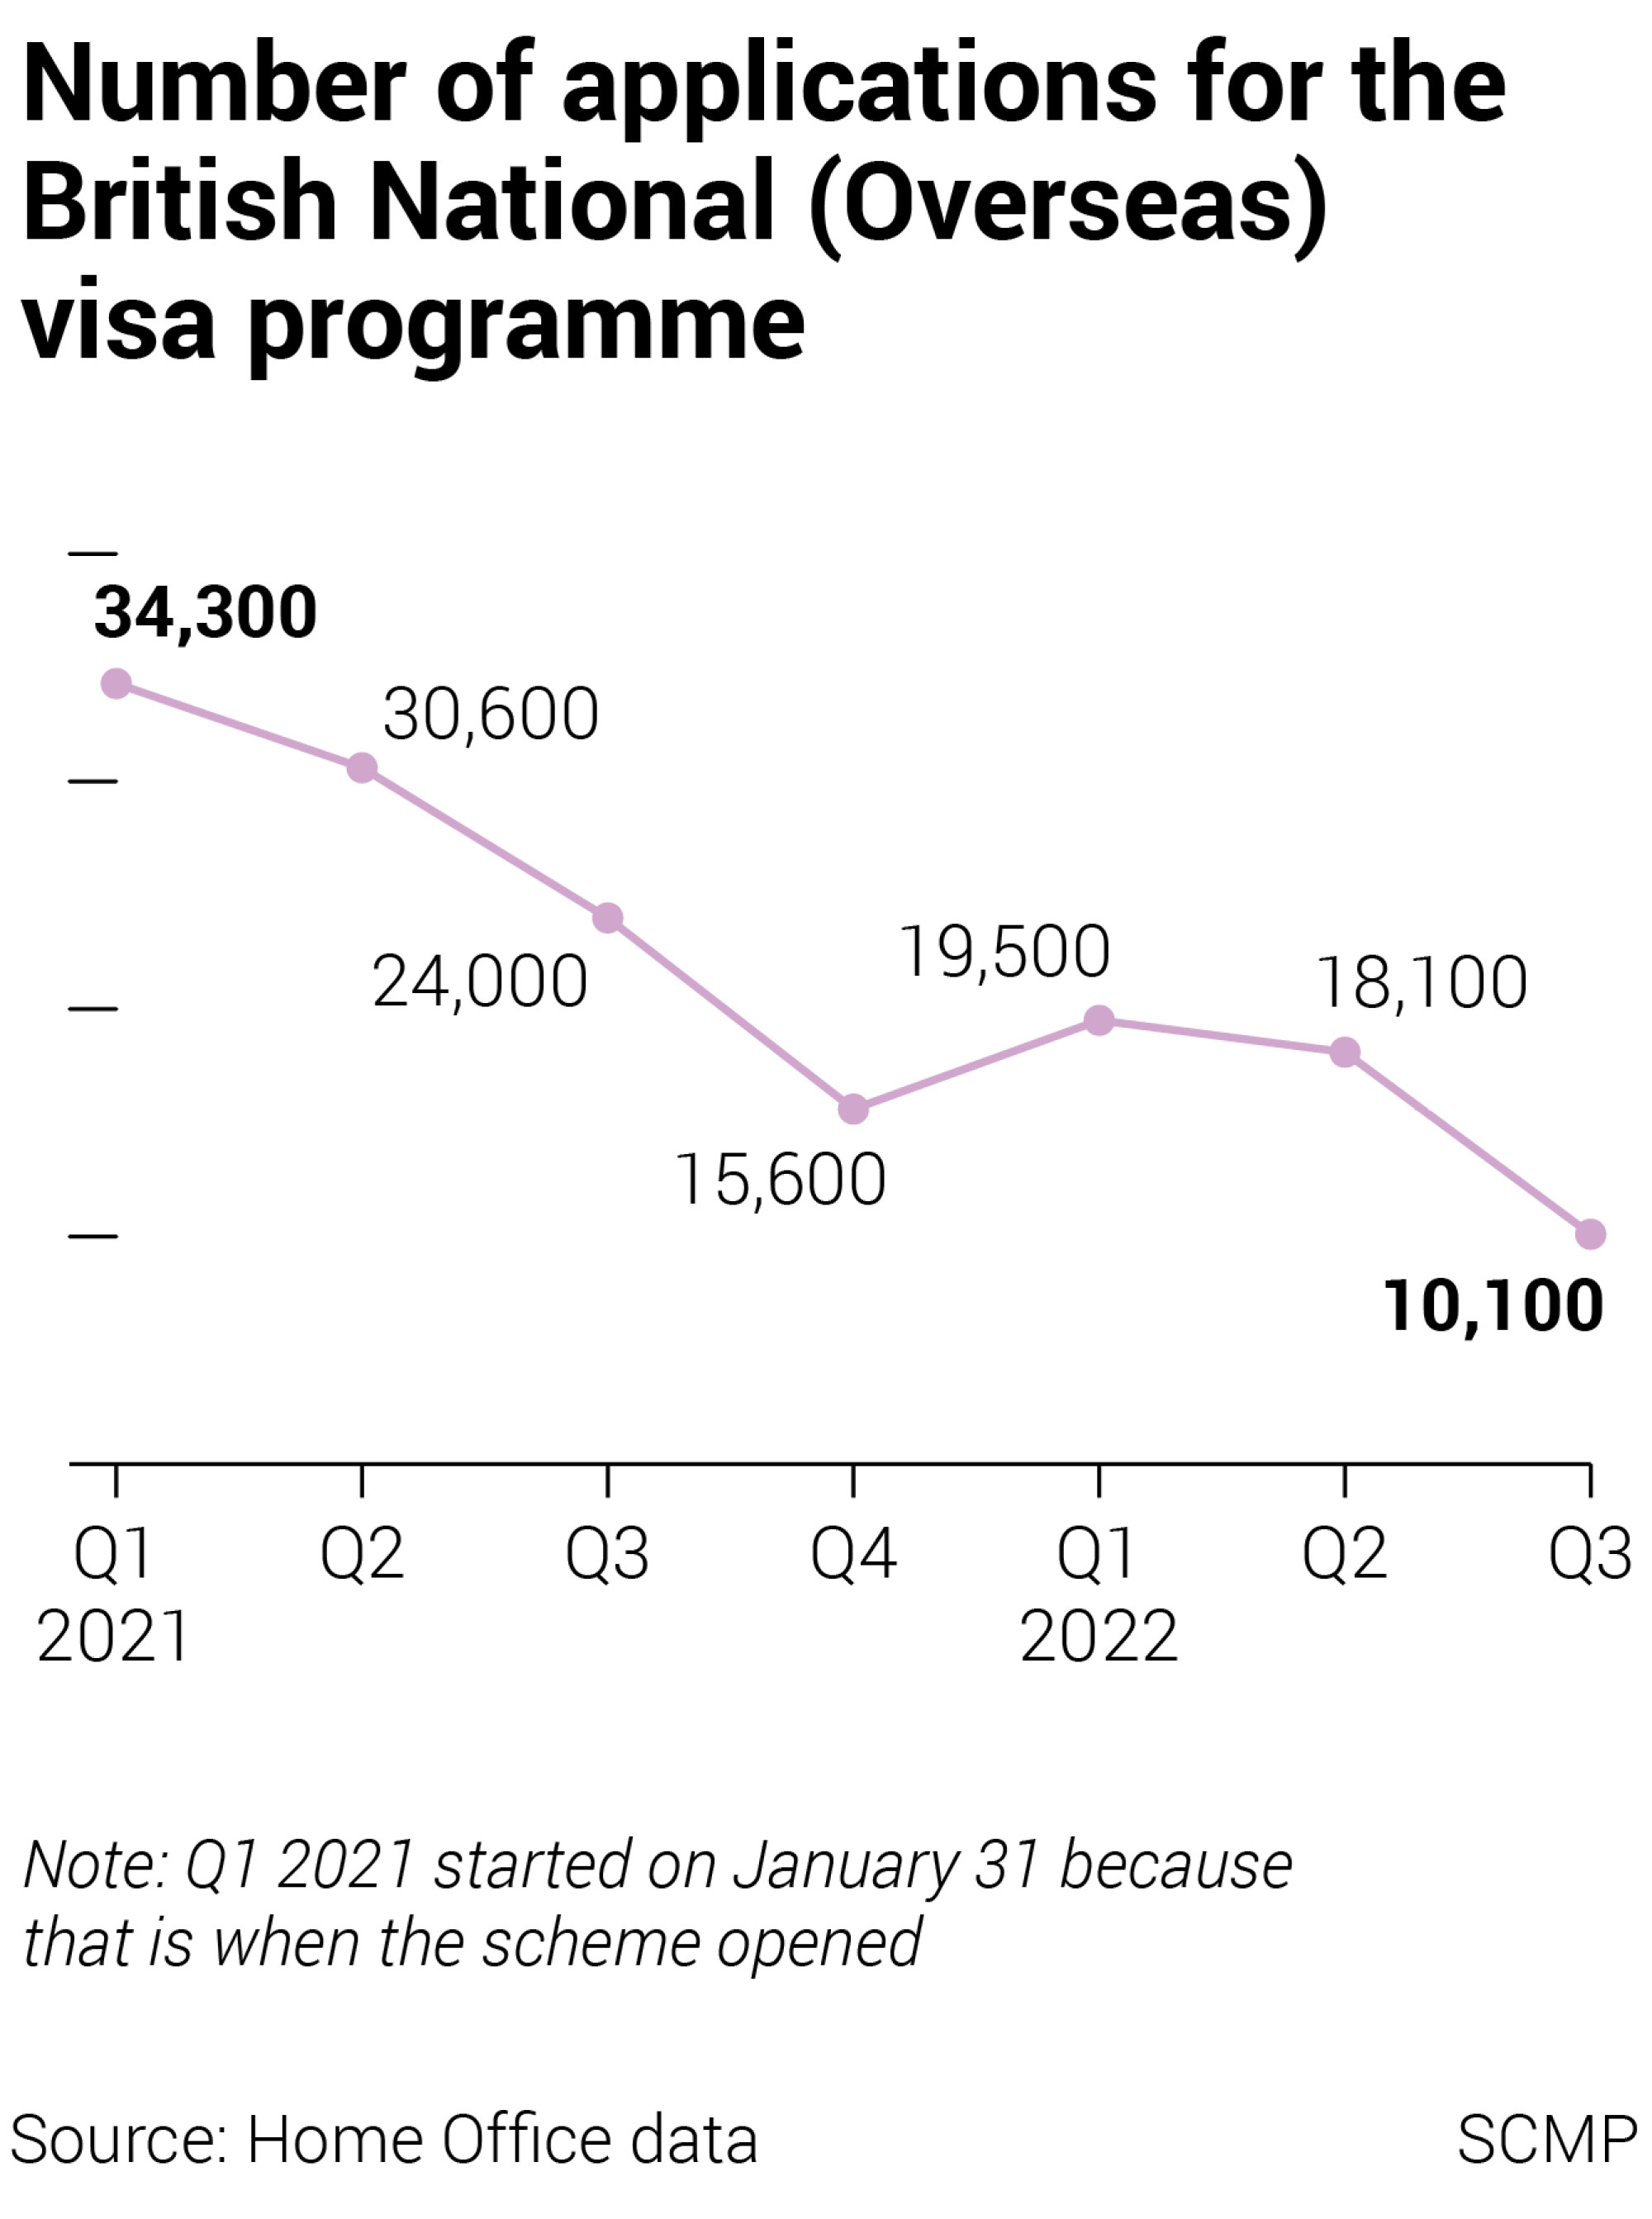 number of hongkongers applying for bn(o) visas this quarter drops to 10,100 as inflation in britain rises, says experts